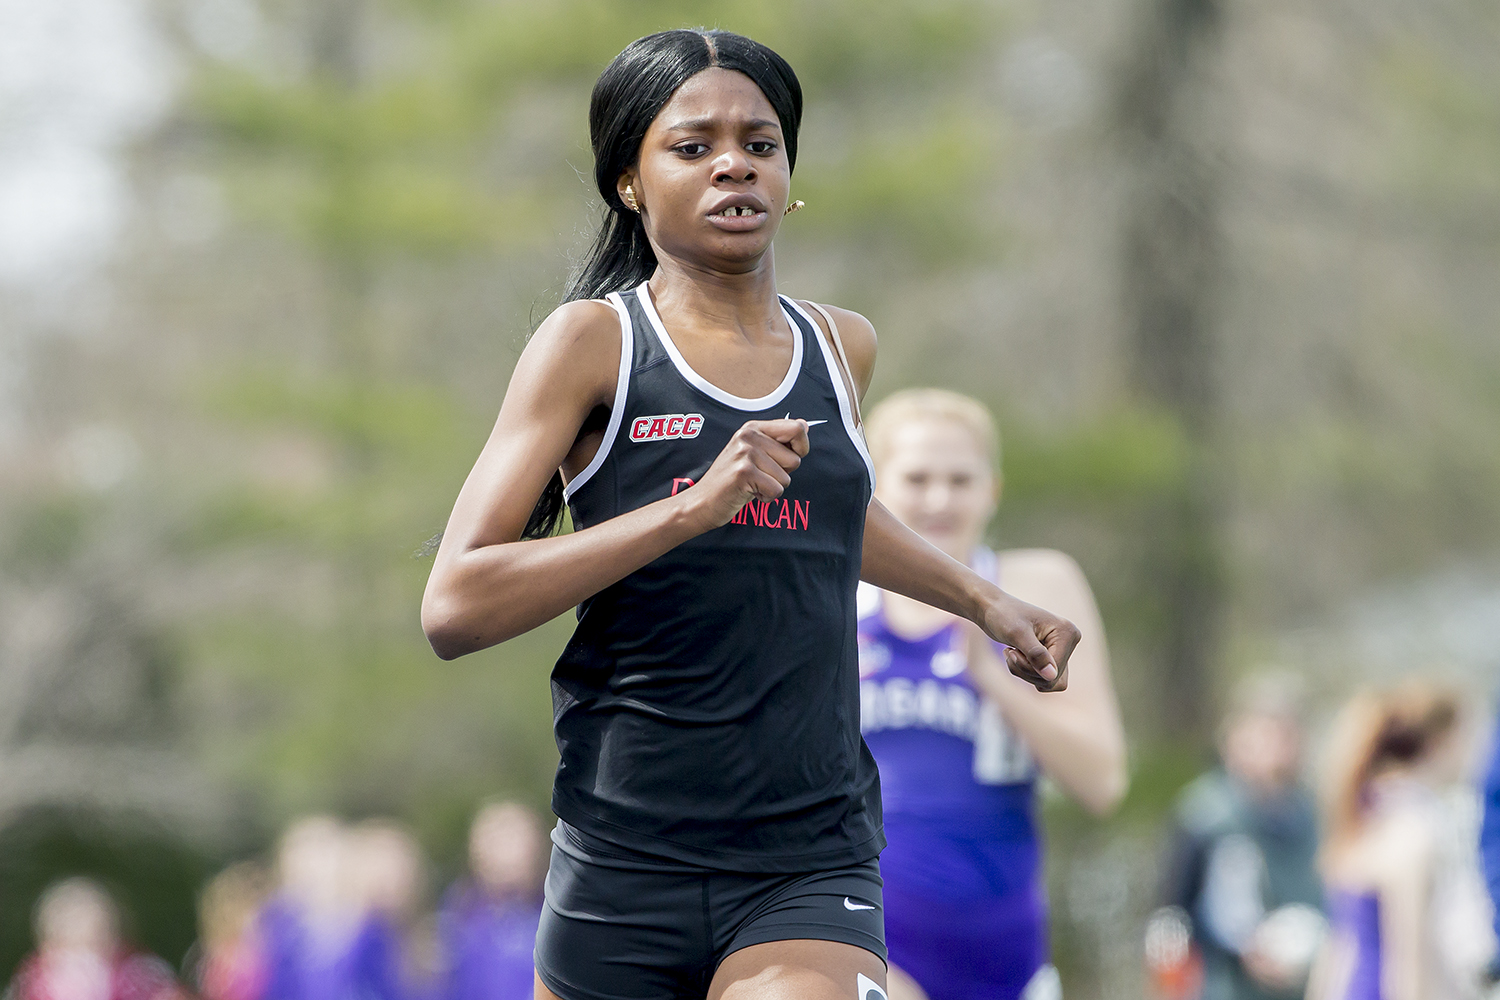 LADY CHARGERS COMPETE AT MONMOUTH WINTER INVITATIONAL